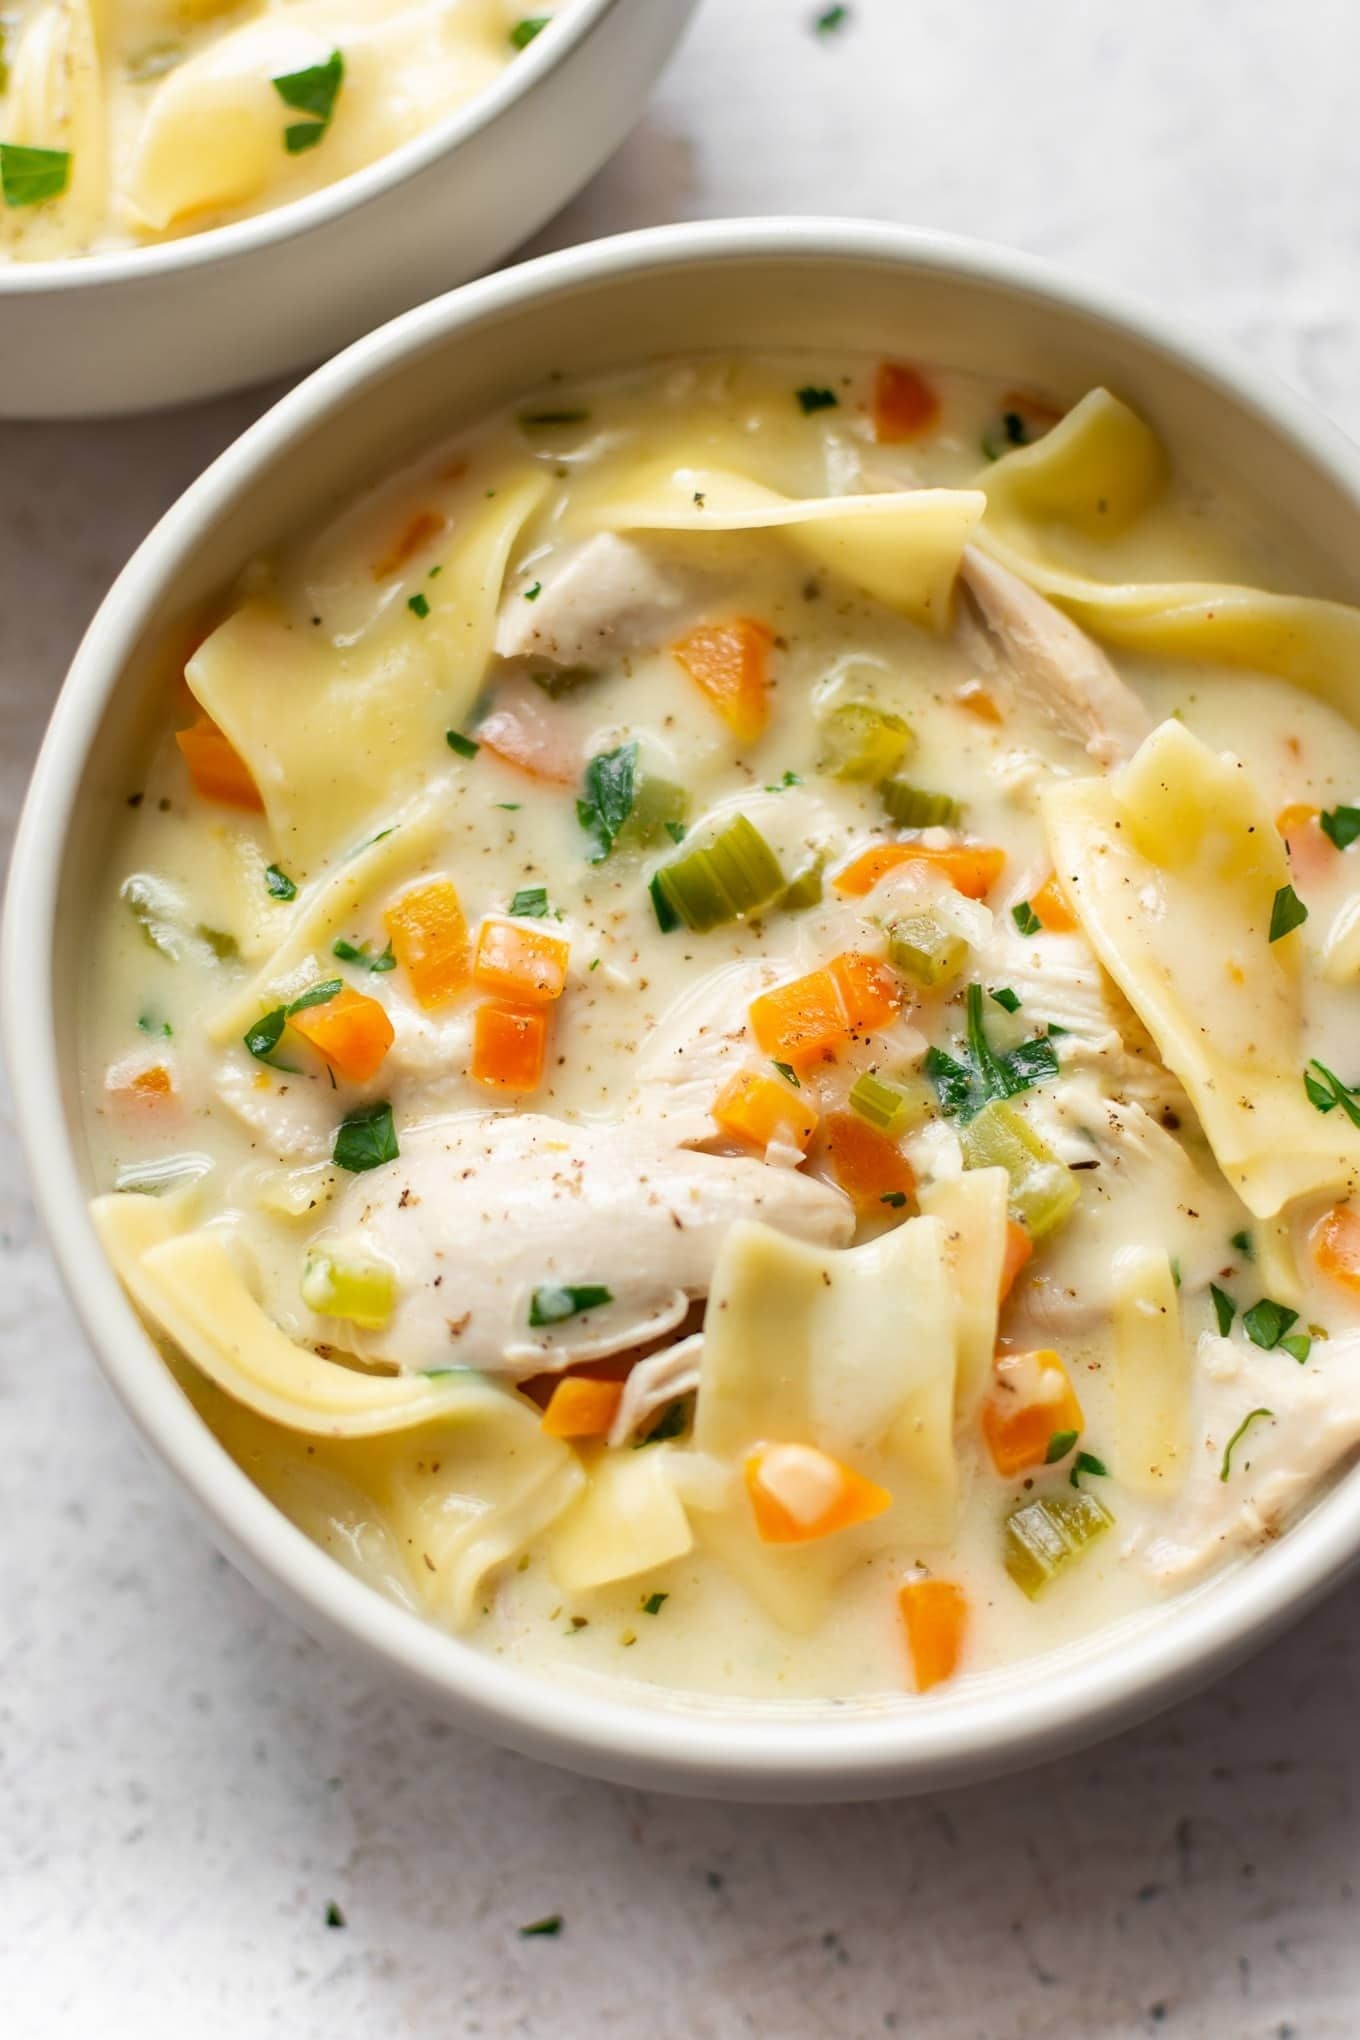 A bowl of creamy chicken noodle soup with carrots, celery, and herbs.